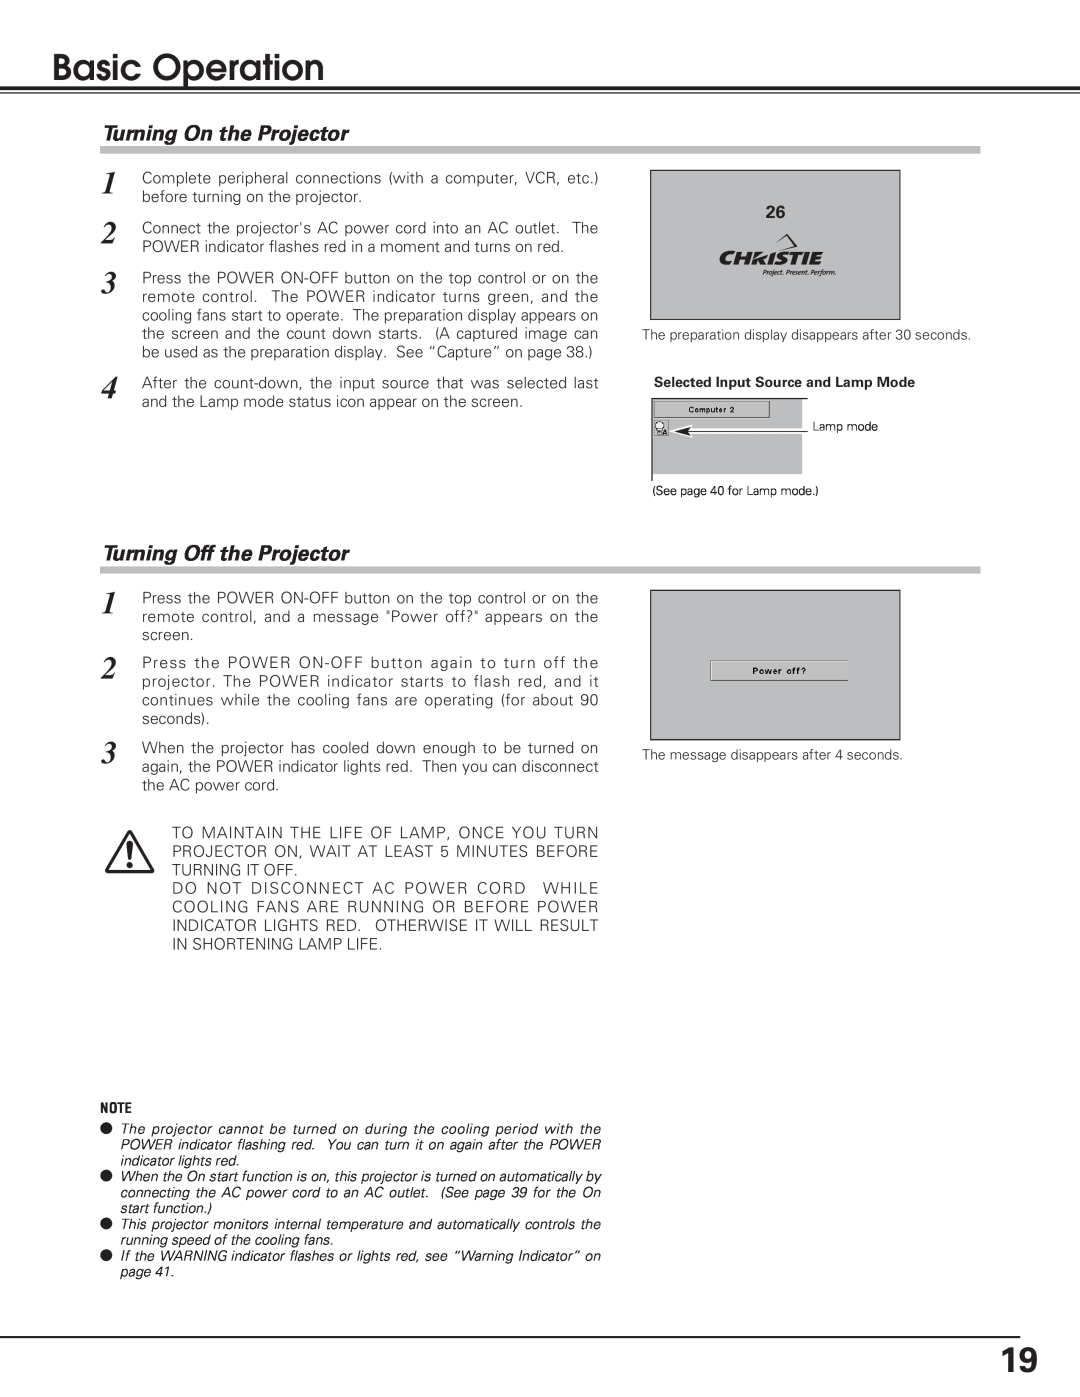 Christie Digital Systems 38-VIV208-01 user manual Basic Operation, Turning On the Projector, Turning Off the Projector 